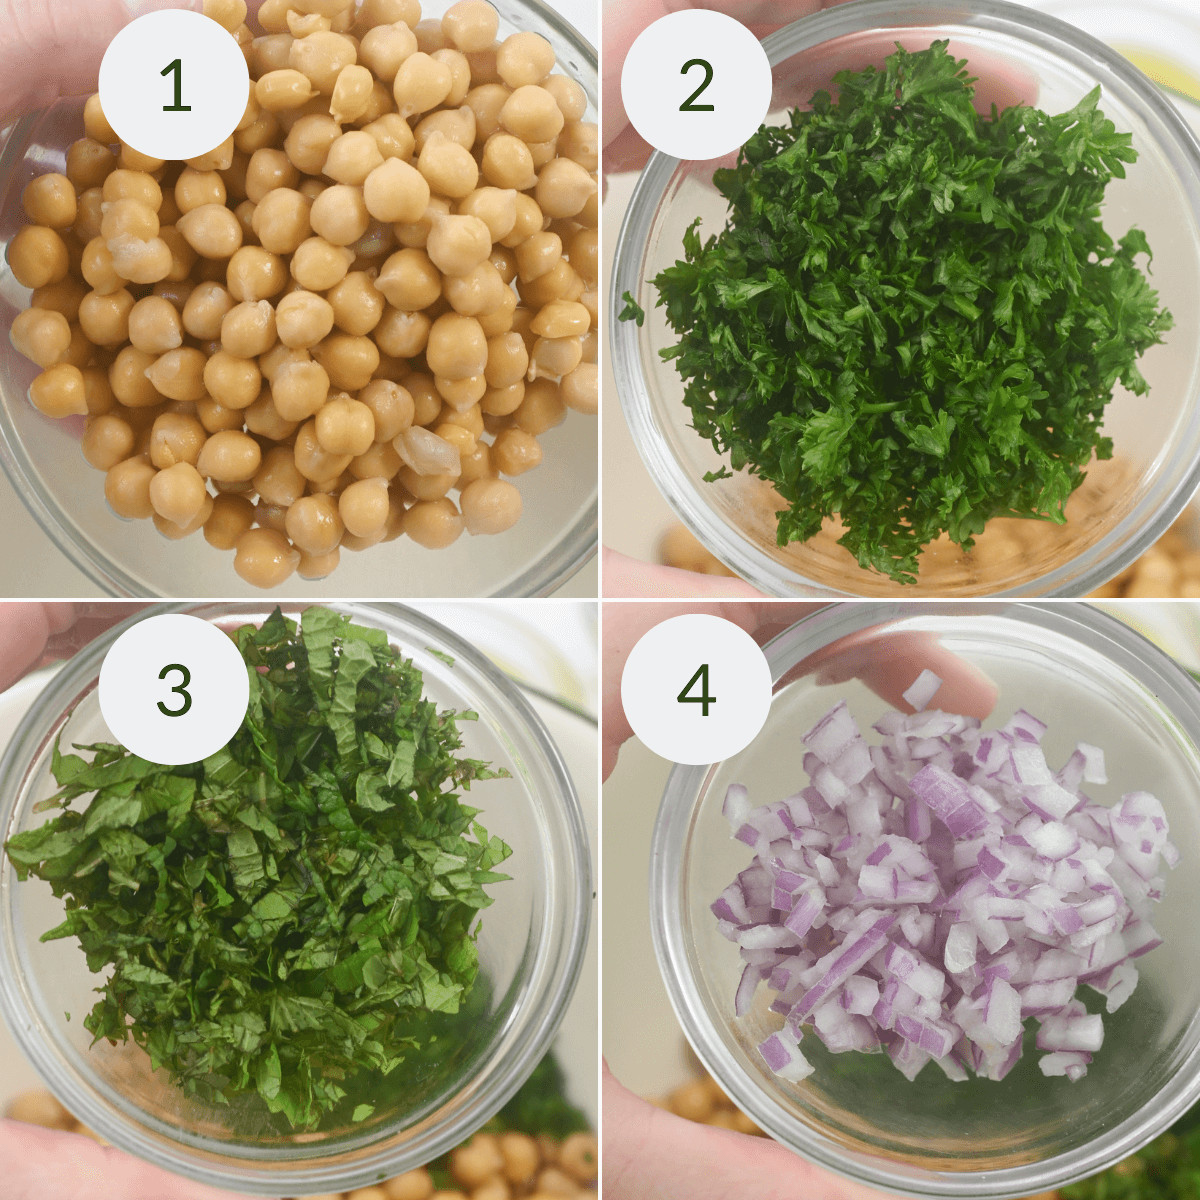 Four images displaying ingredients for a salad in bowls: 1) chickpeas, 2) finely chopped parsley, 3) coarsely chopped parsley, 4) diced